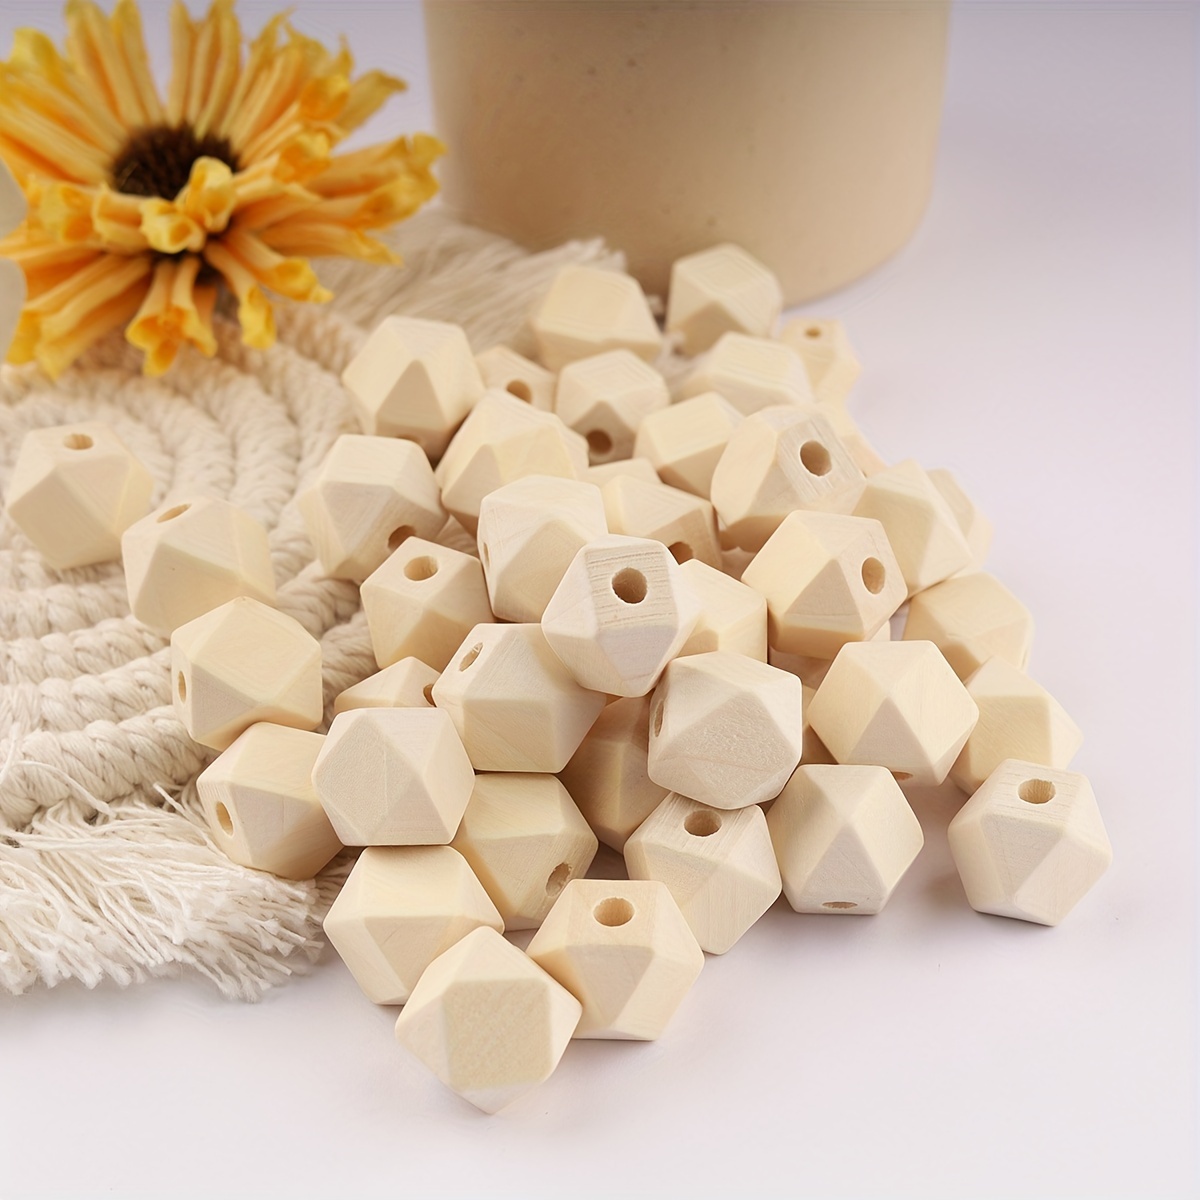 

30pcs Natural Geometric Unfinished Polygon Wooden With Hole Spacer Beads For Jewelry Making Diy Special Decors Necklace Handmade Craft Supplies, Gifts